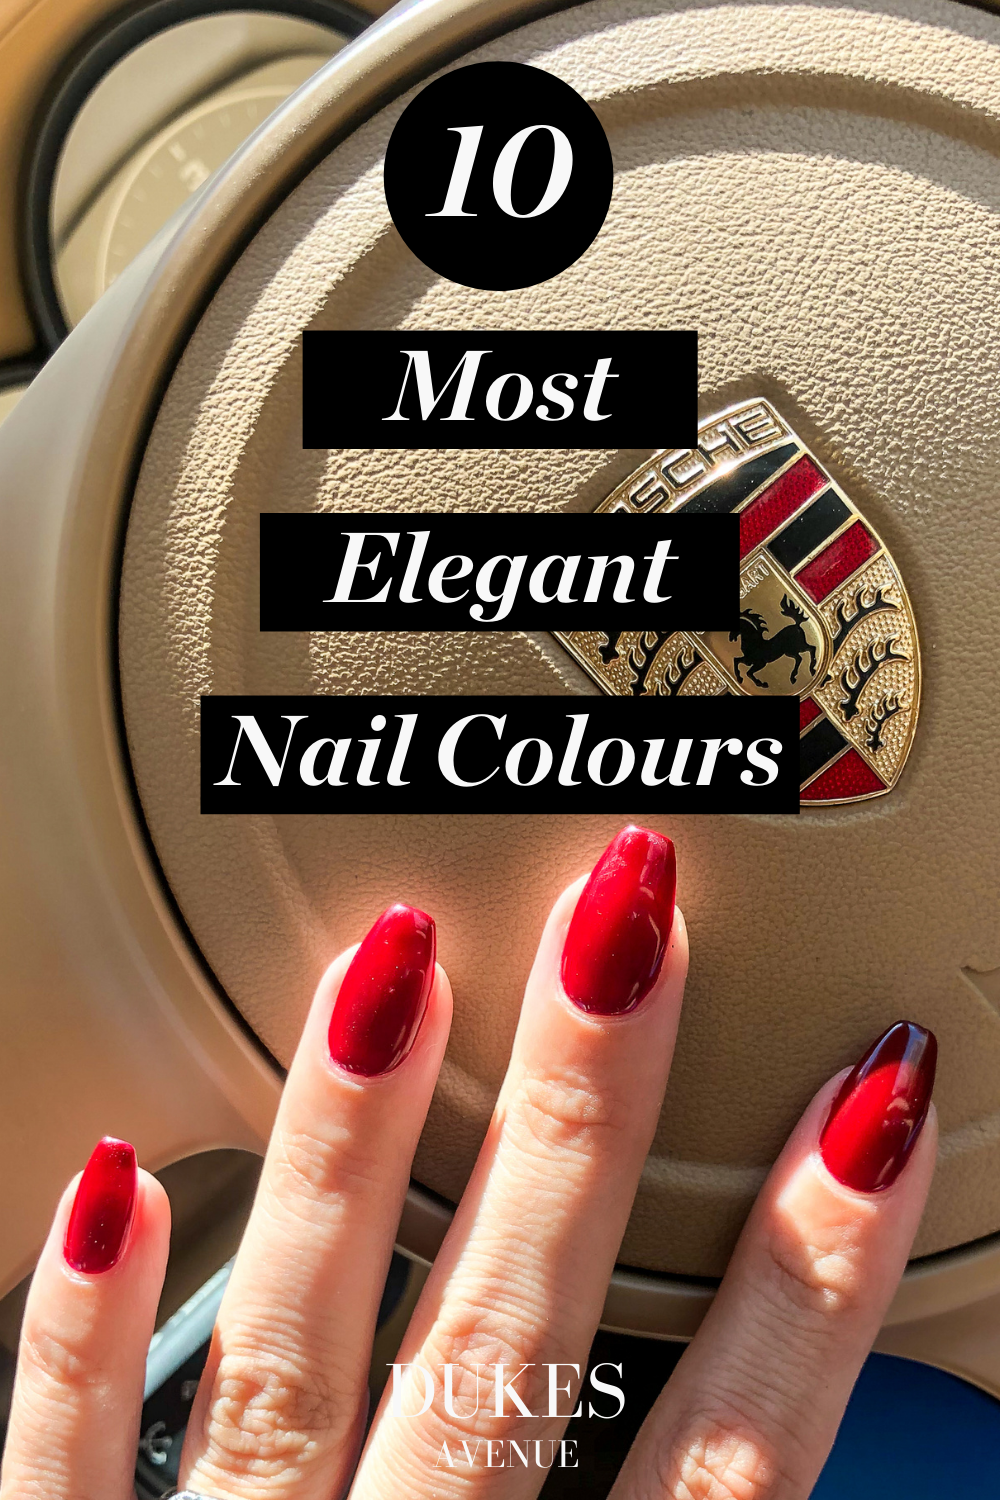 Hand against steering wheel with red manicure with text overlay of 10 most elegant nail colours